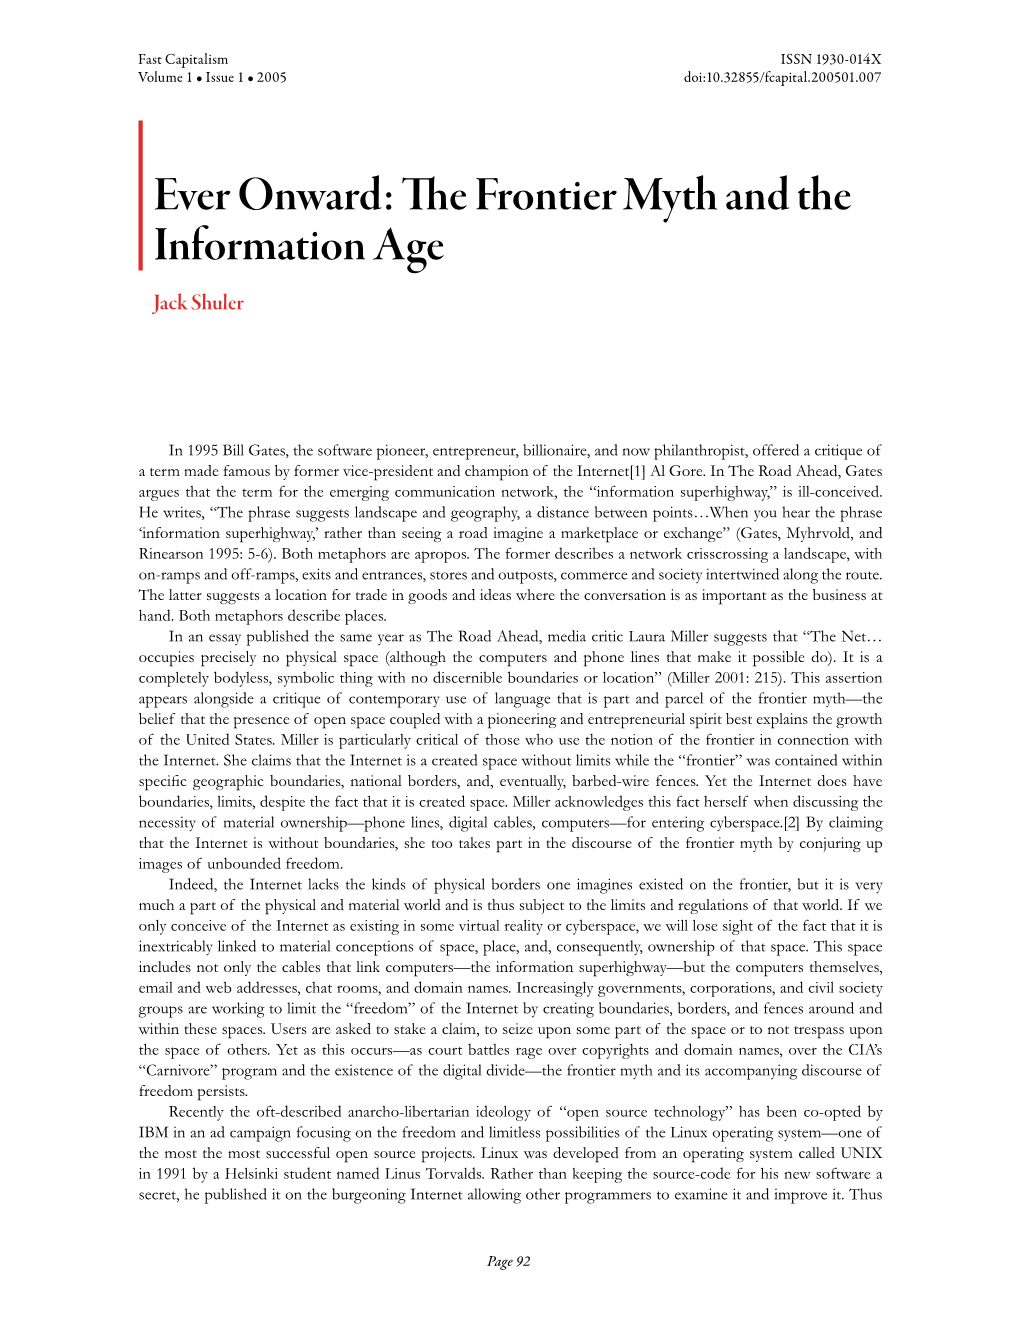 Ever Onward: the Frontier Myth and the Information Age Jack Shuler